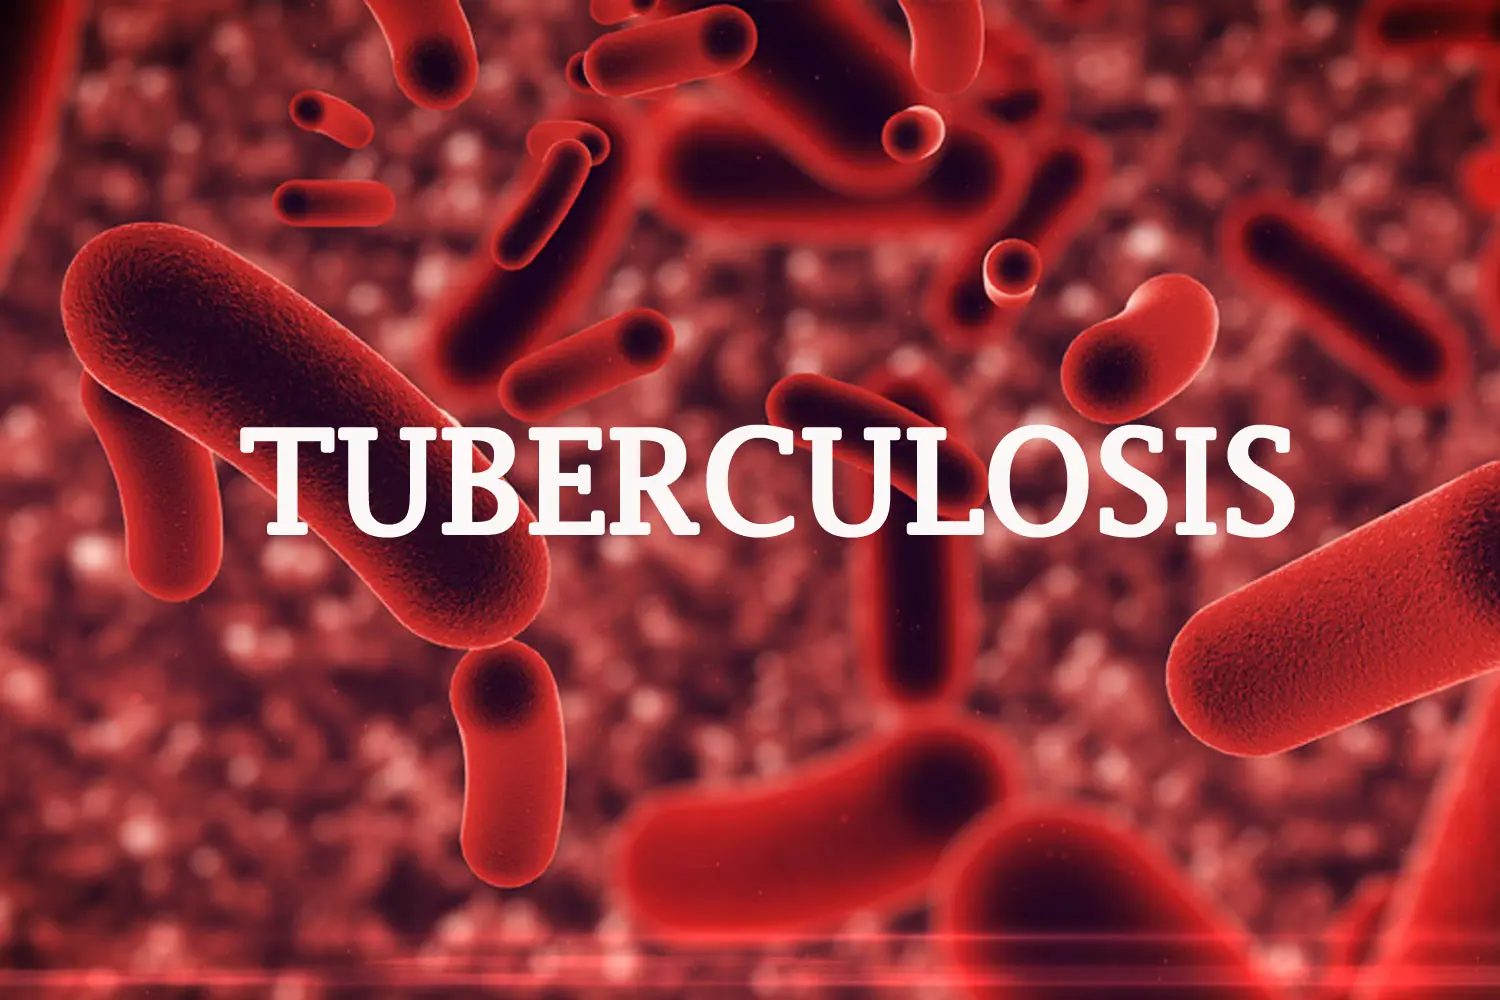 Bauchi State detects 7,806 cases of tuberculosis